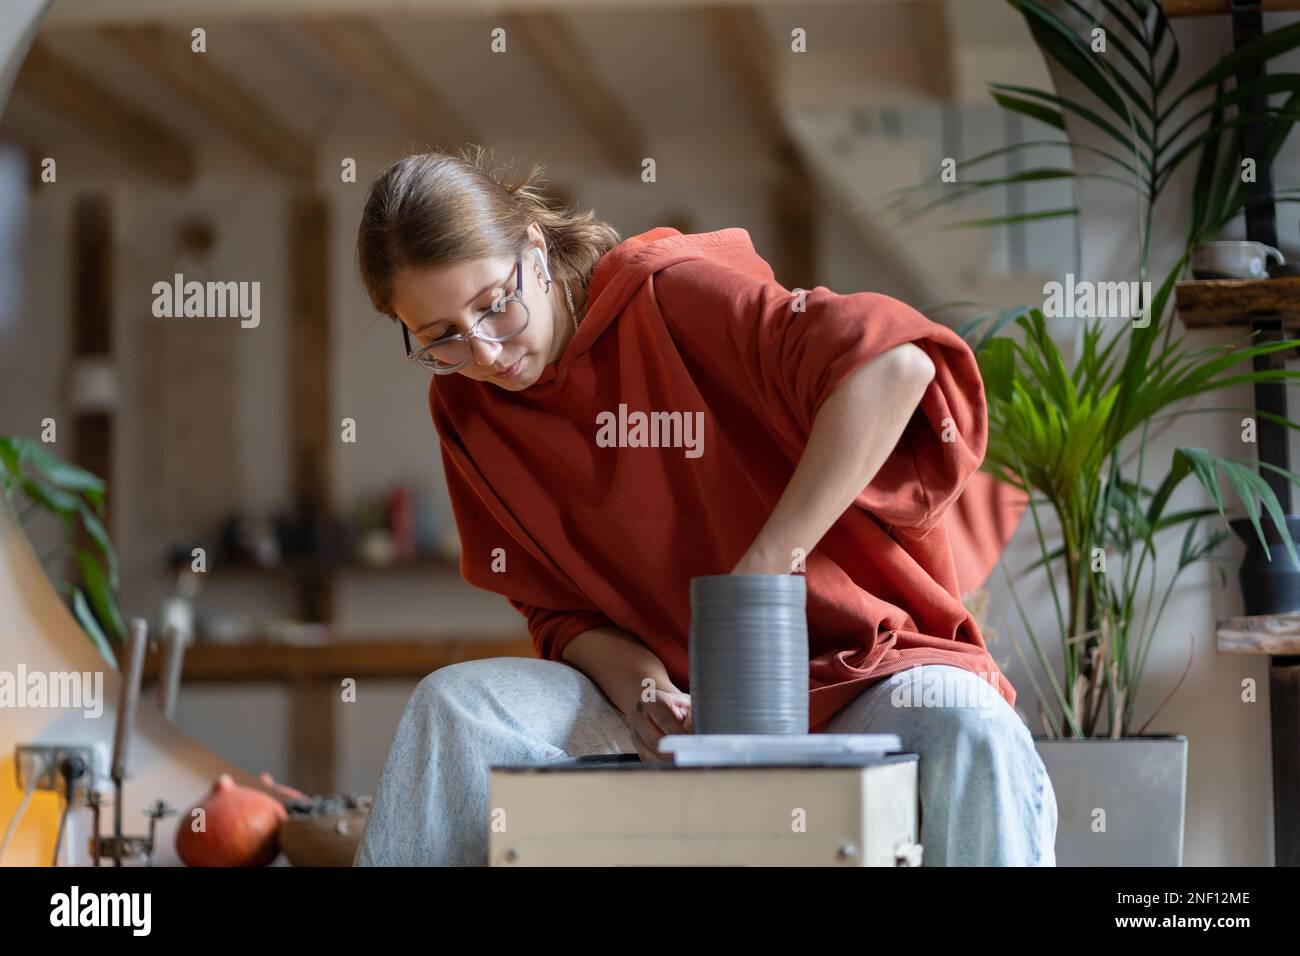 Pottery artist owner ceramic store woman making shaping clay product vase or jar in modern workshop. Stock Photo